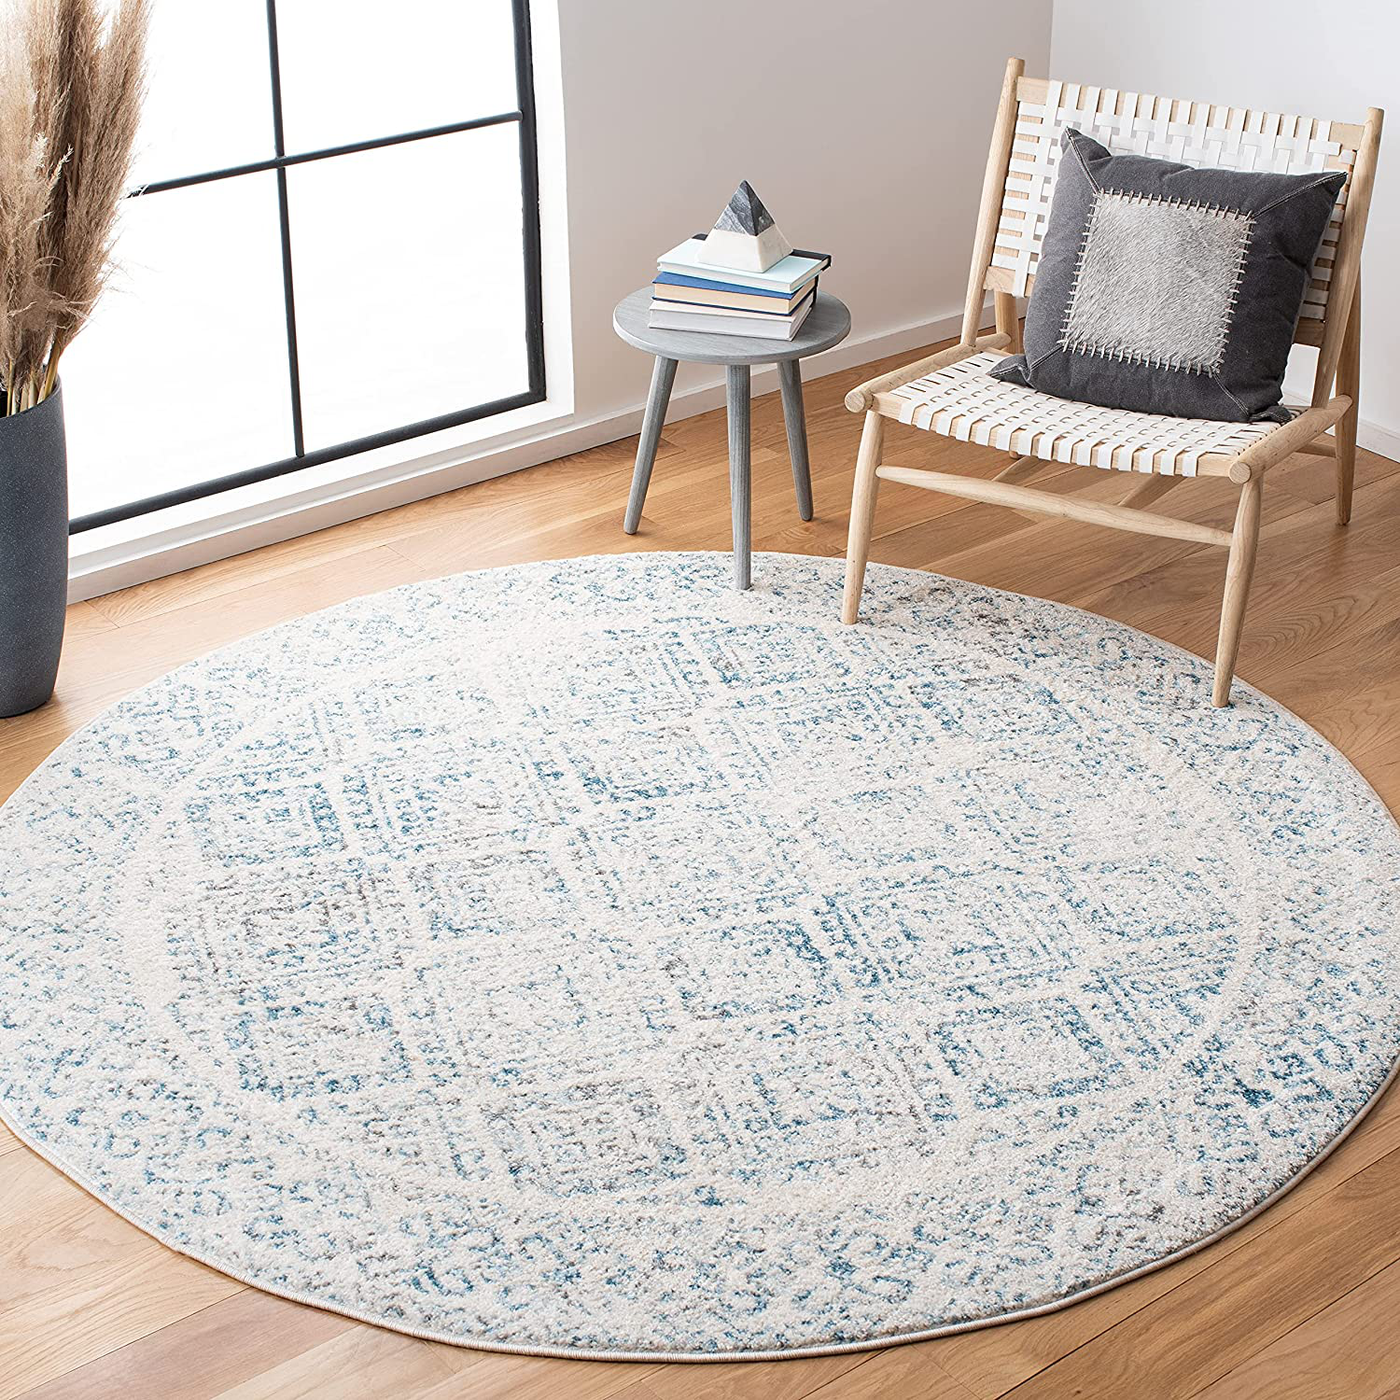 Safavieh Tulum Collection TUL264B Moroccan Boho Distressed Non-Shedding Stain Resistant Living Room Bedroom Area Rug, 3' x 3' Round, Ivory / Turquoise